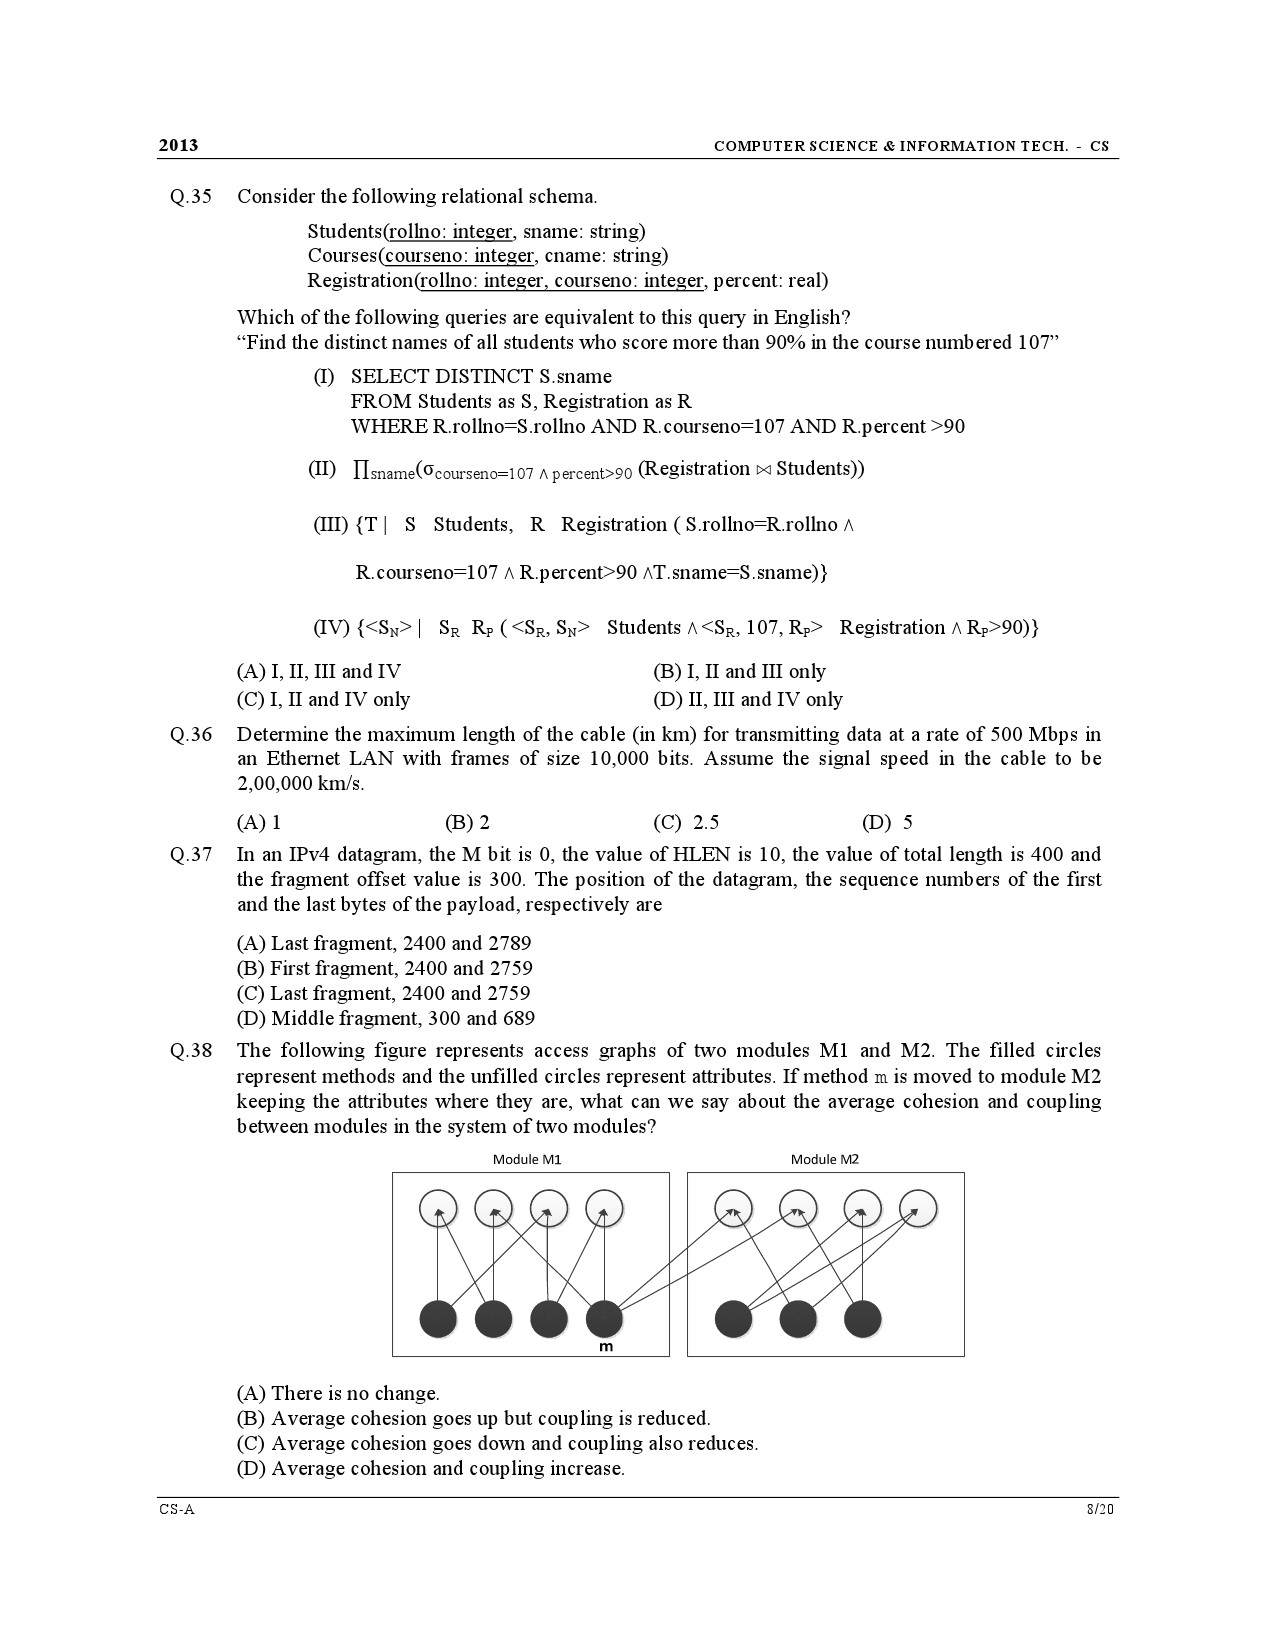 GATE Exam Question Paper 2013 Computer Science and Information Technology 8